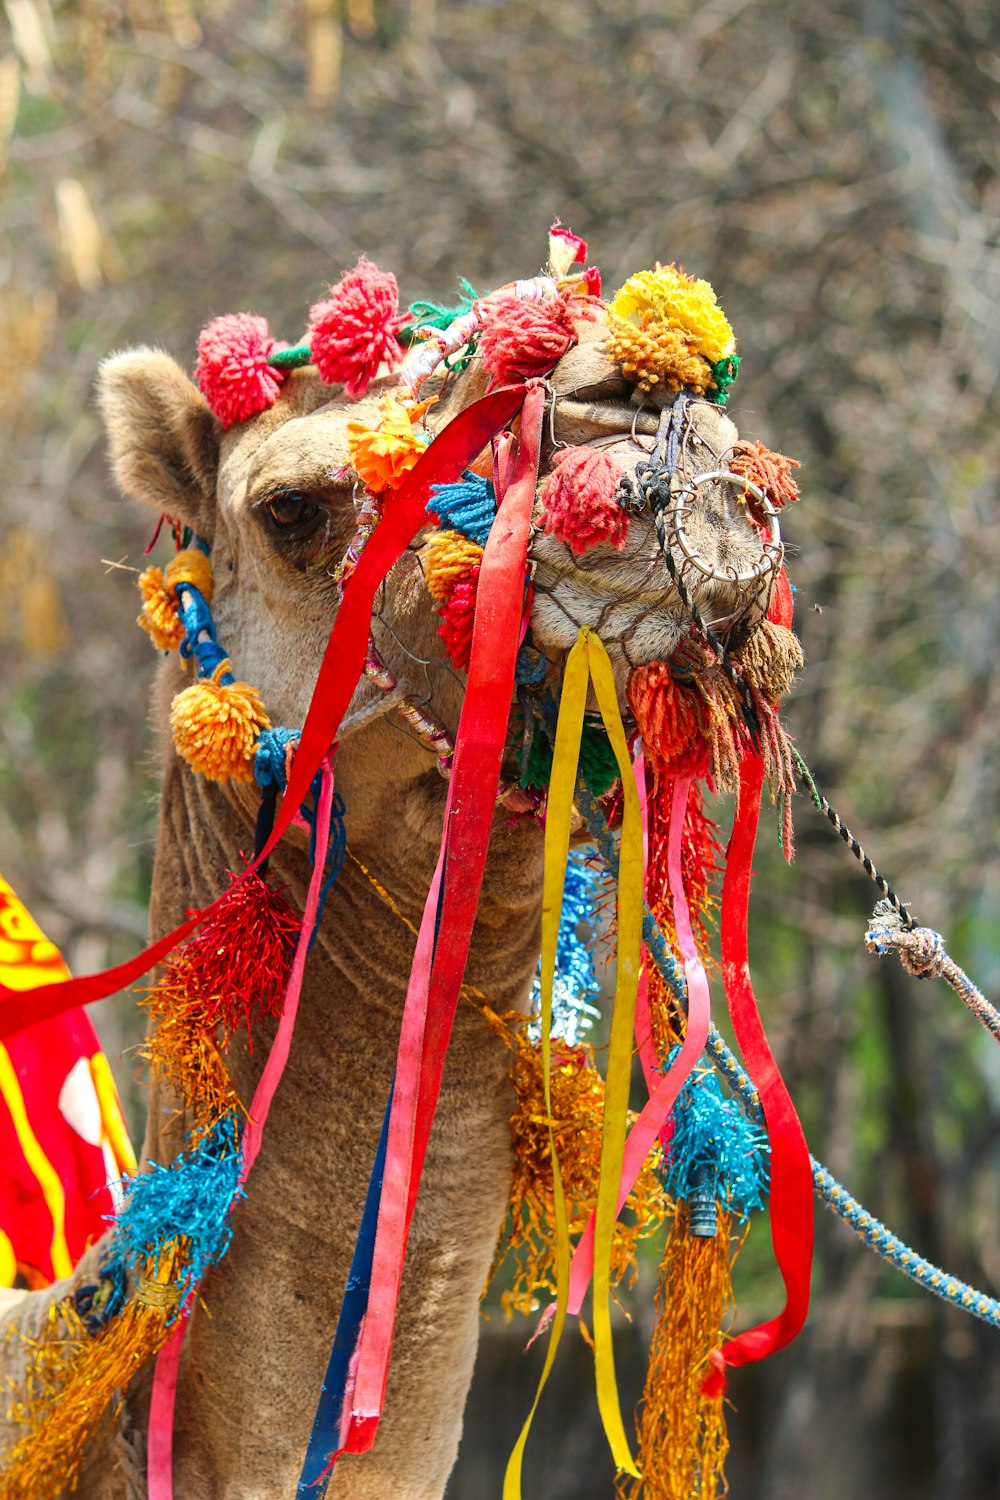 a close up of a decorated camel with trees in the background